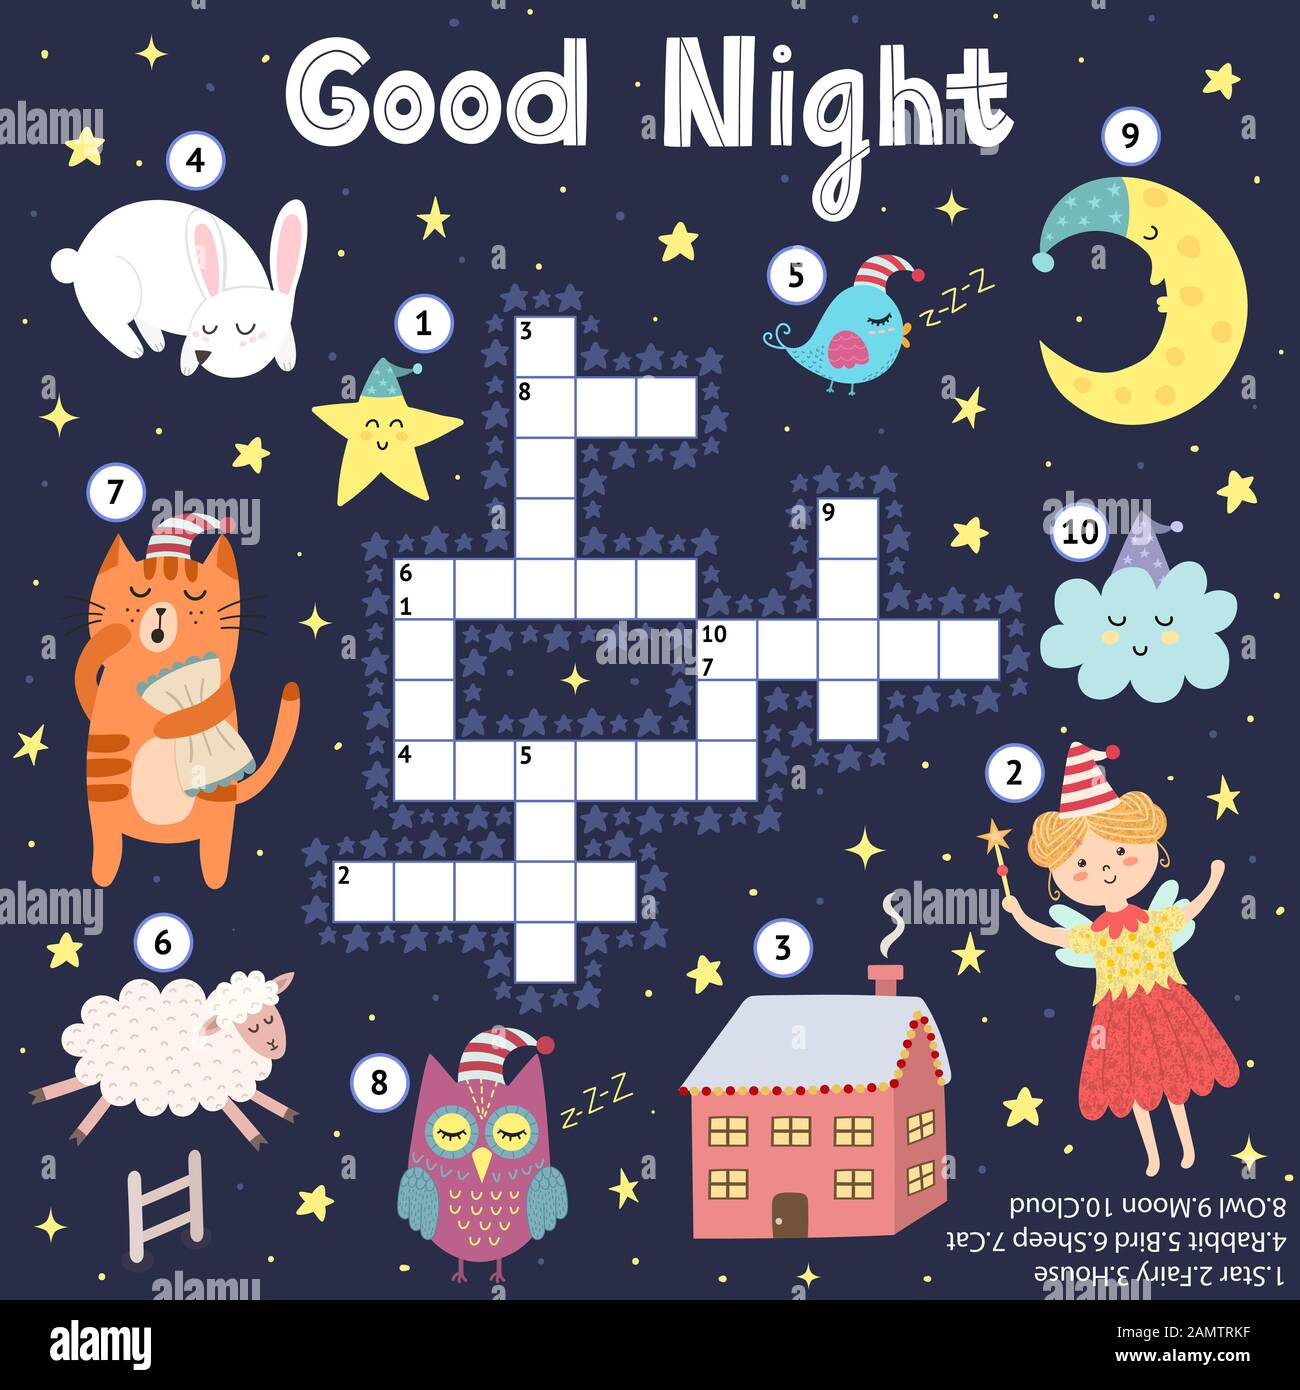 Good Night crossword game for kids. Sweet dreams find word puzzle ...